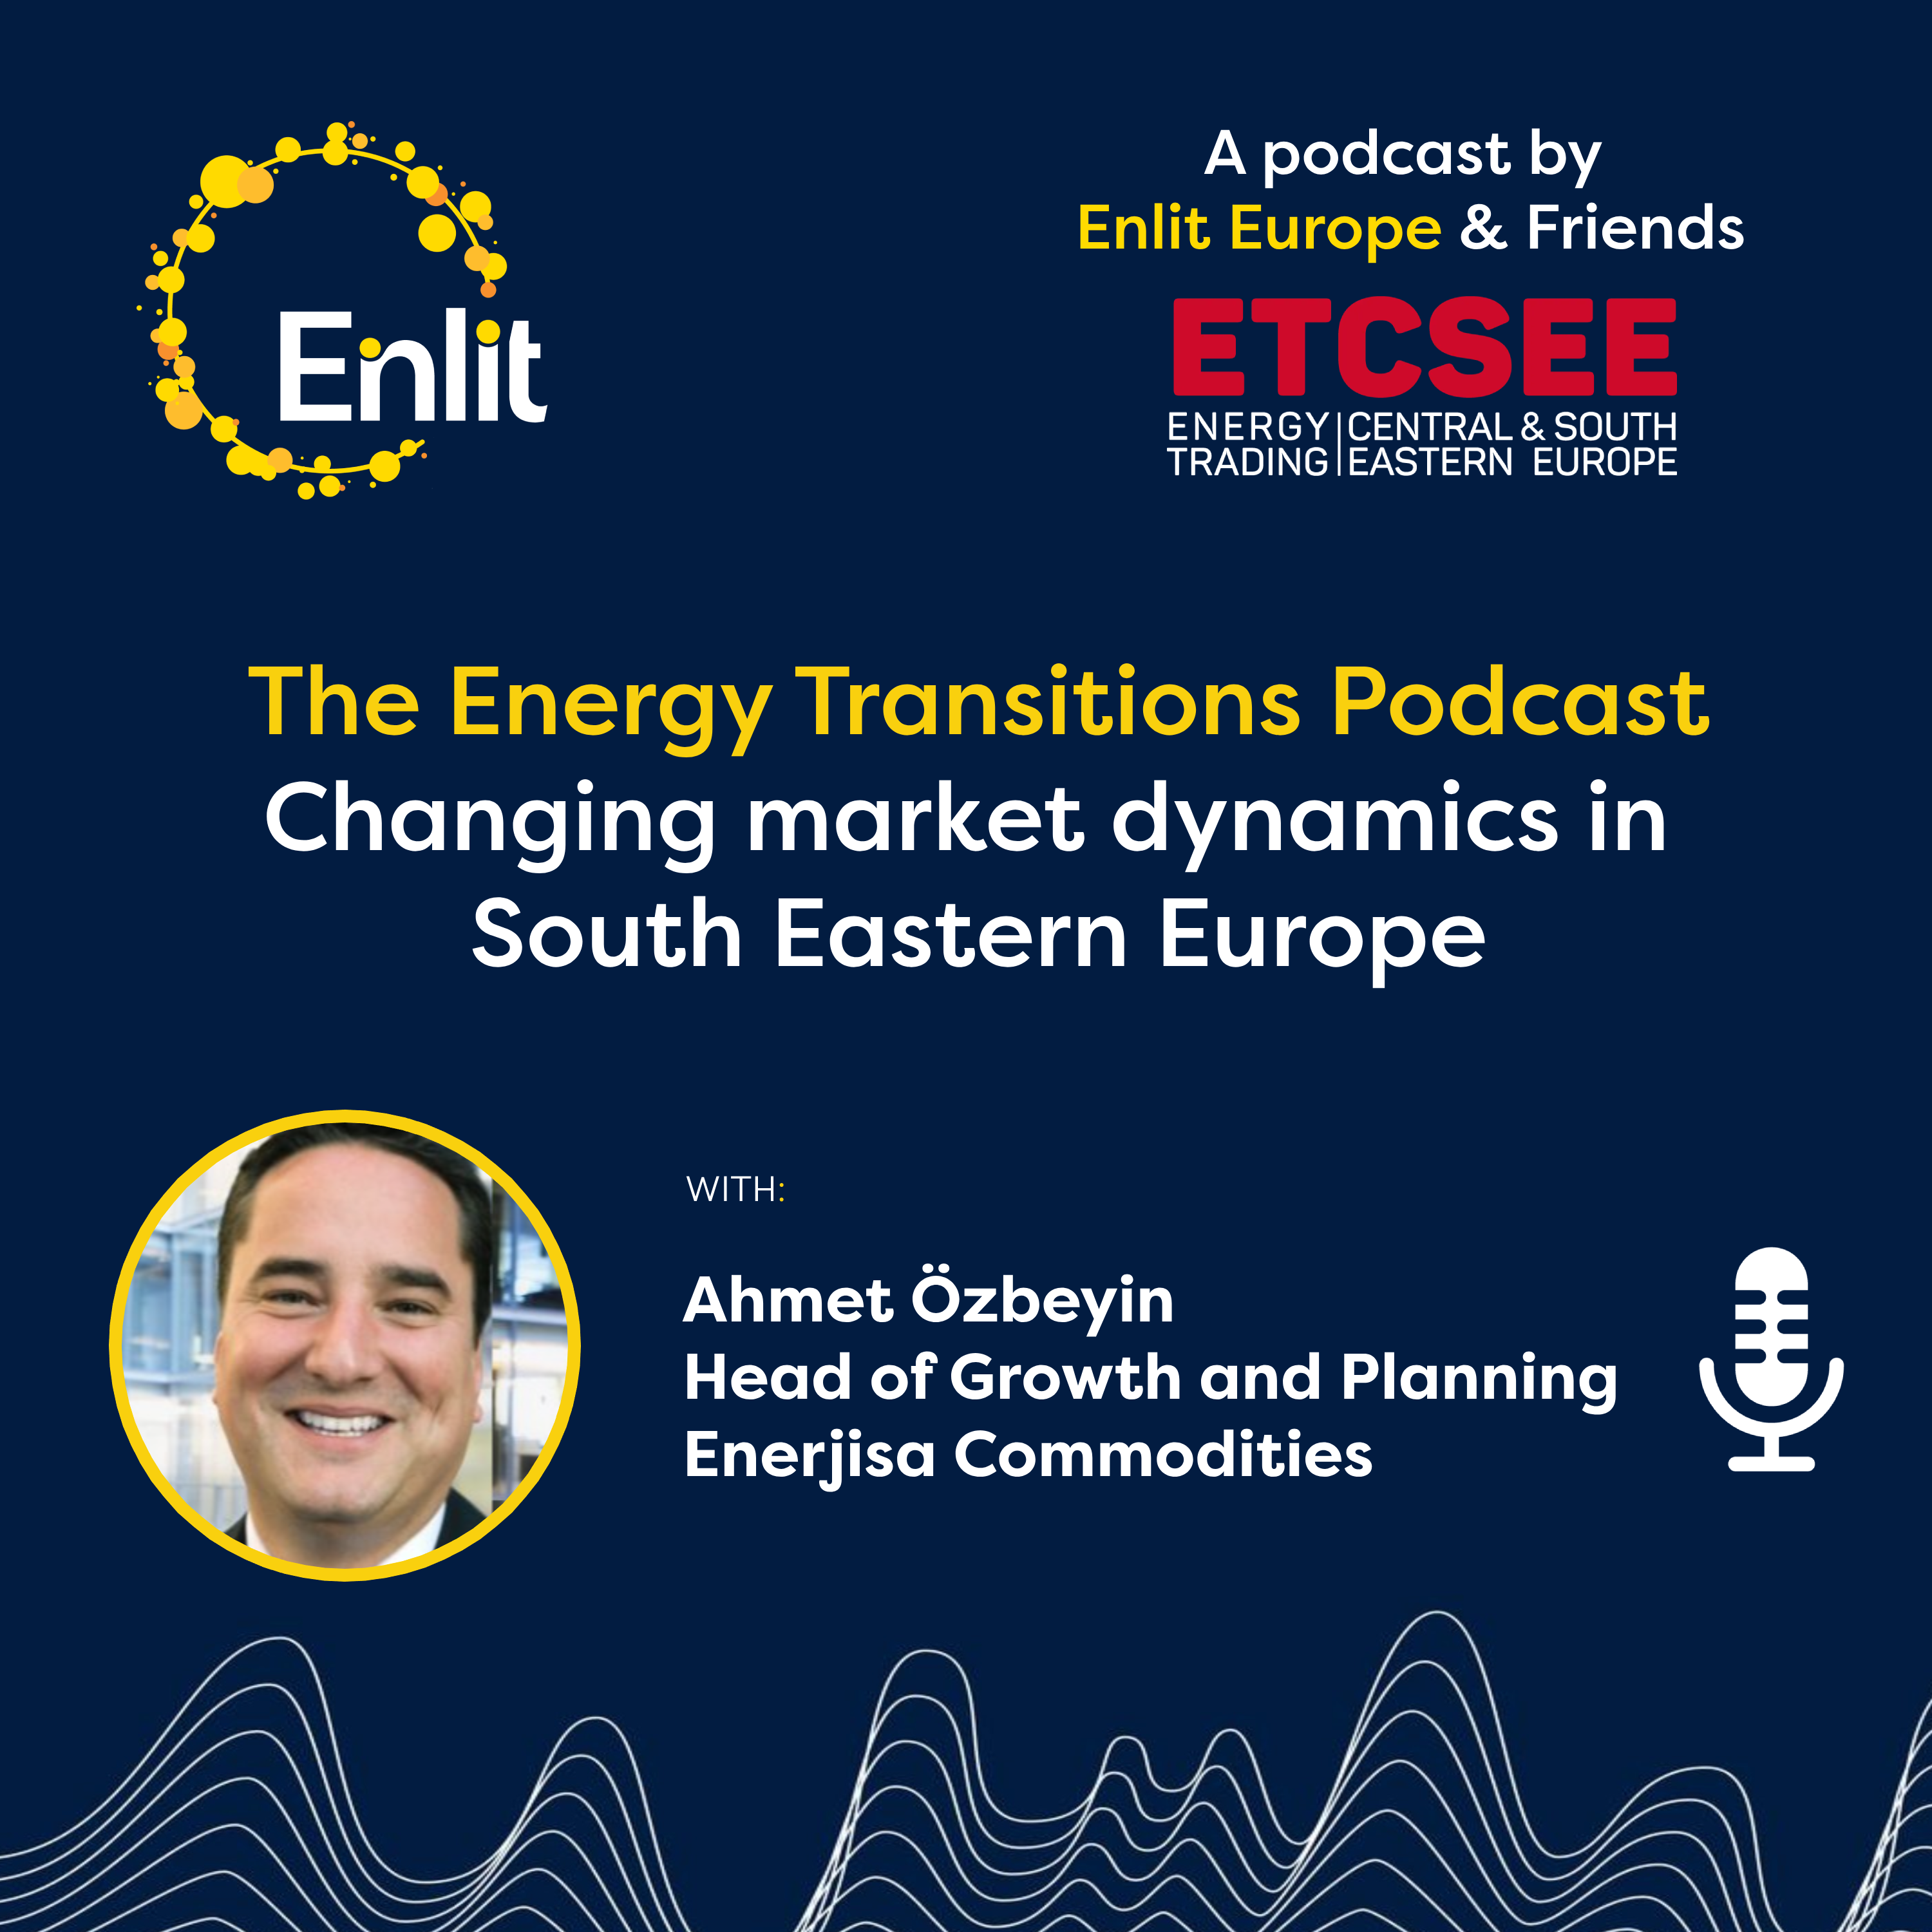 Energy Transitions Podcast: Changing market dynamics in South Eastern Europe